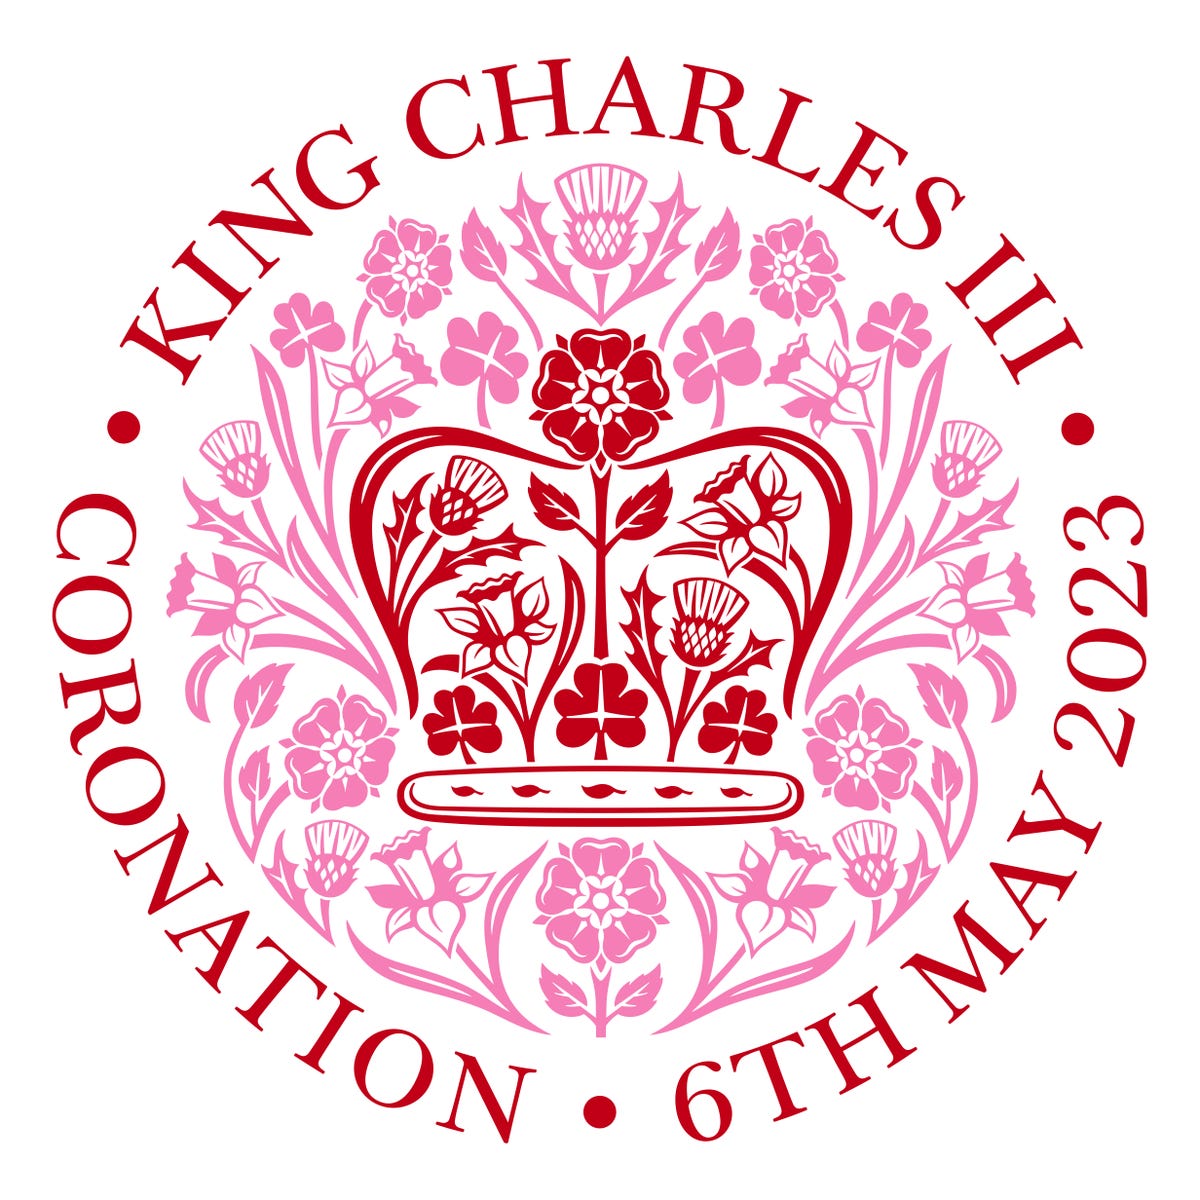 The coronation emblem in a rosy pink.